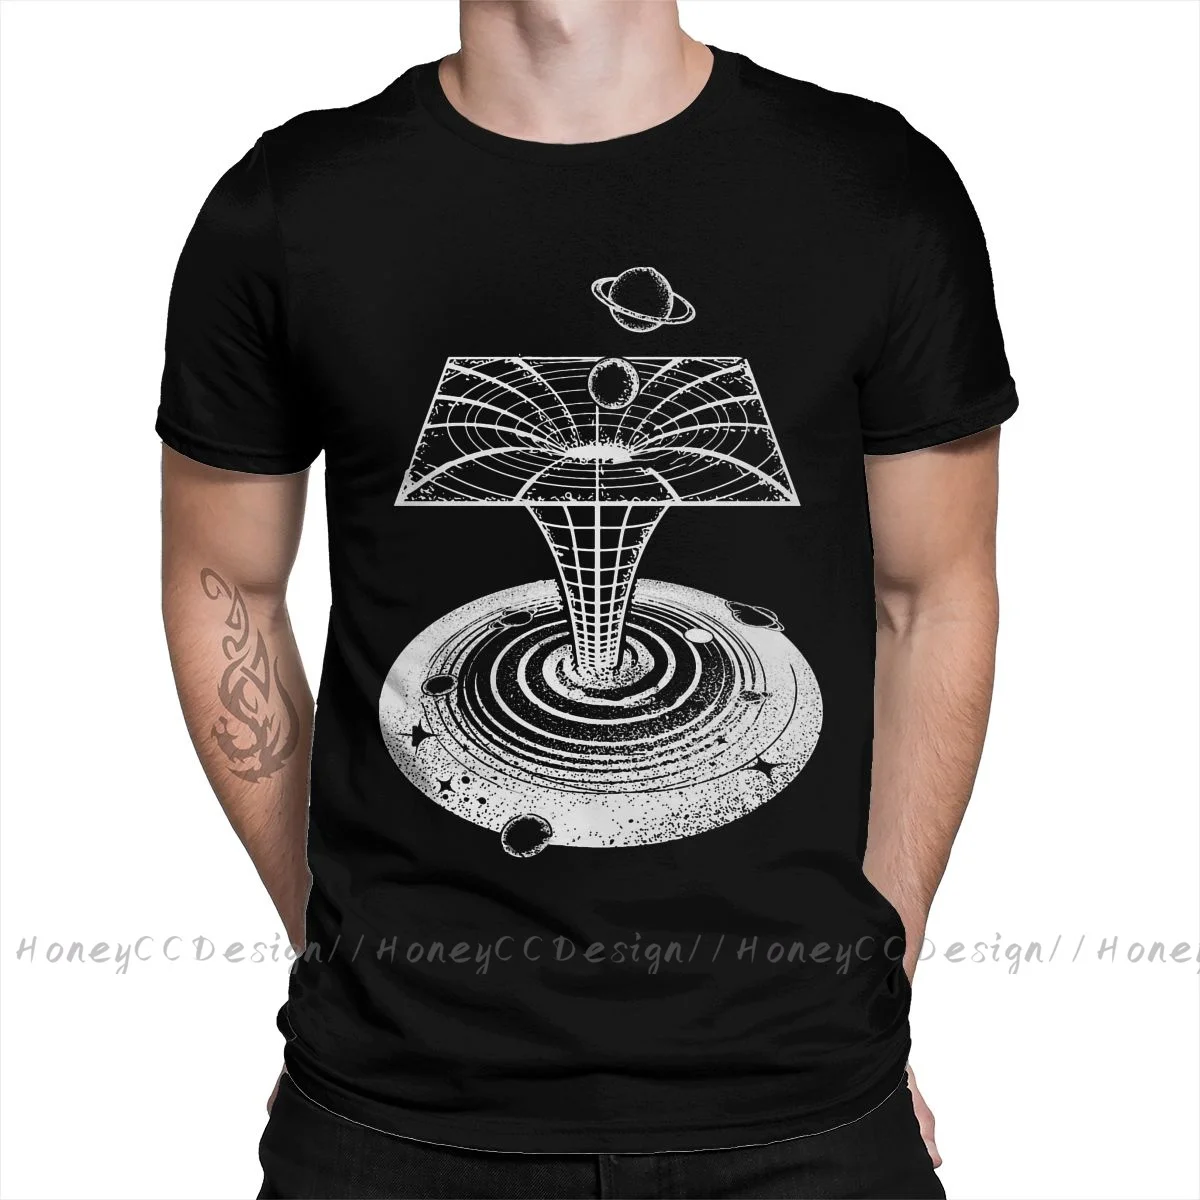 Black Hole Science T-Shirt Men Top Quality 100% Cotton Short Classic Summer Sleeve asual Shirt Loose Tees